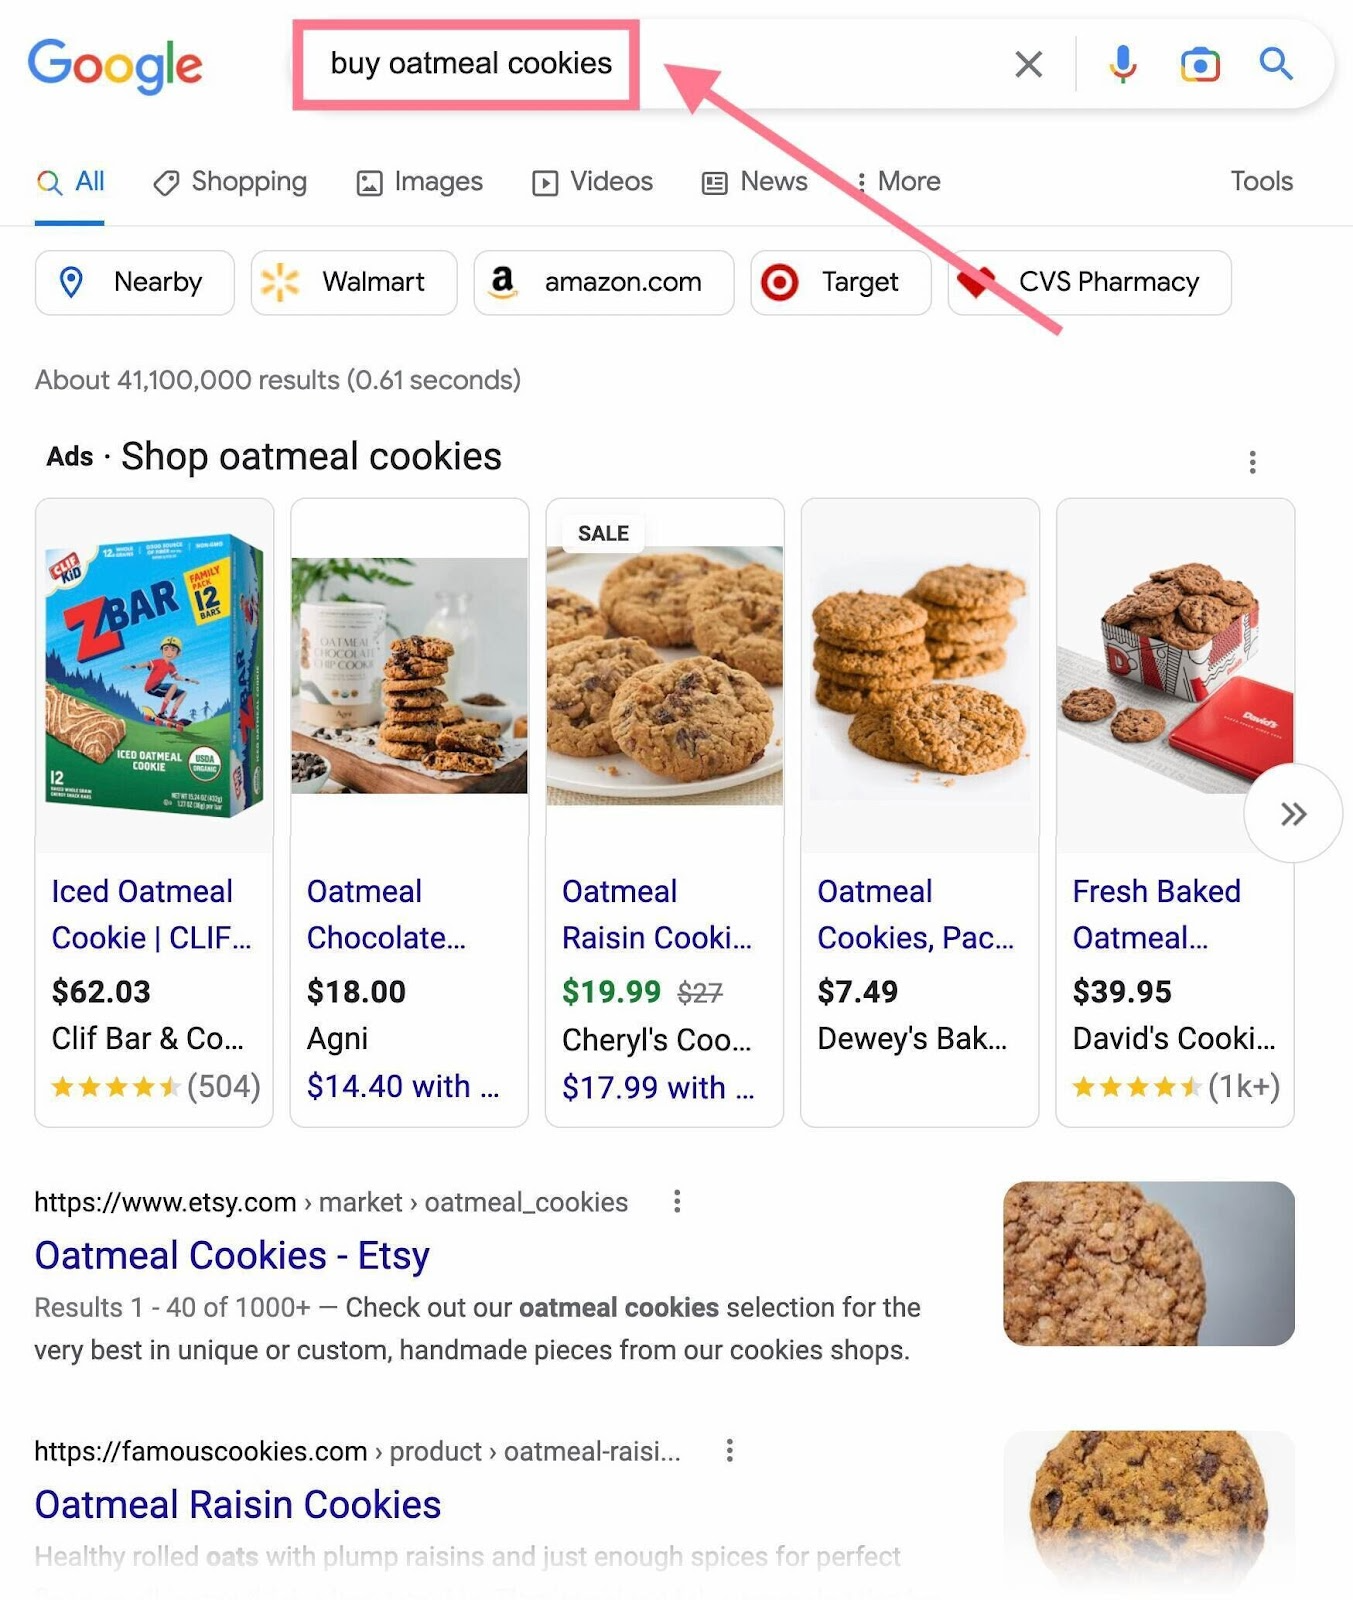 The search results for “buy oatmeal cookies”